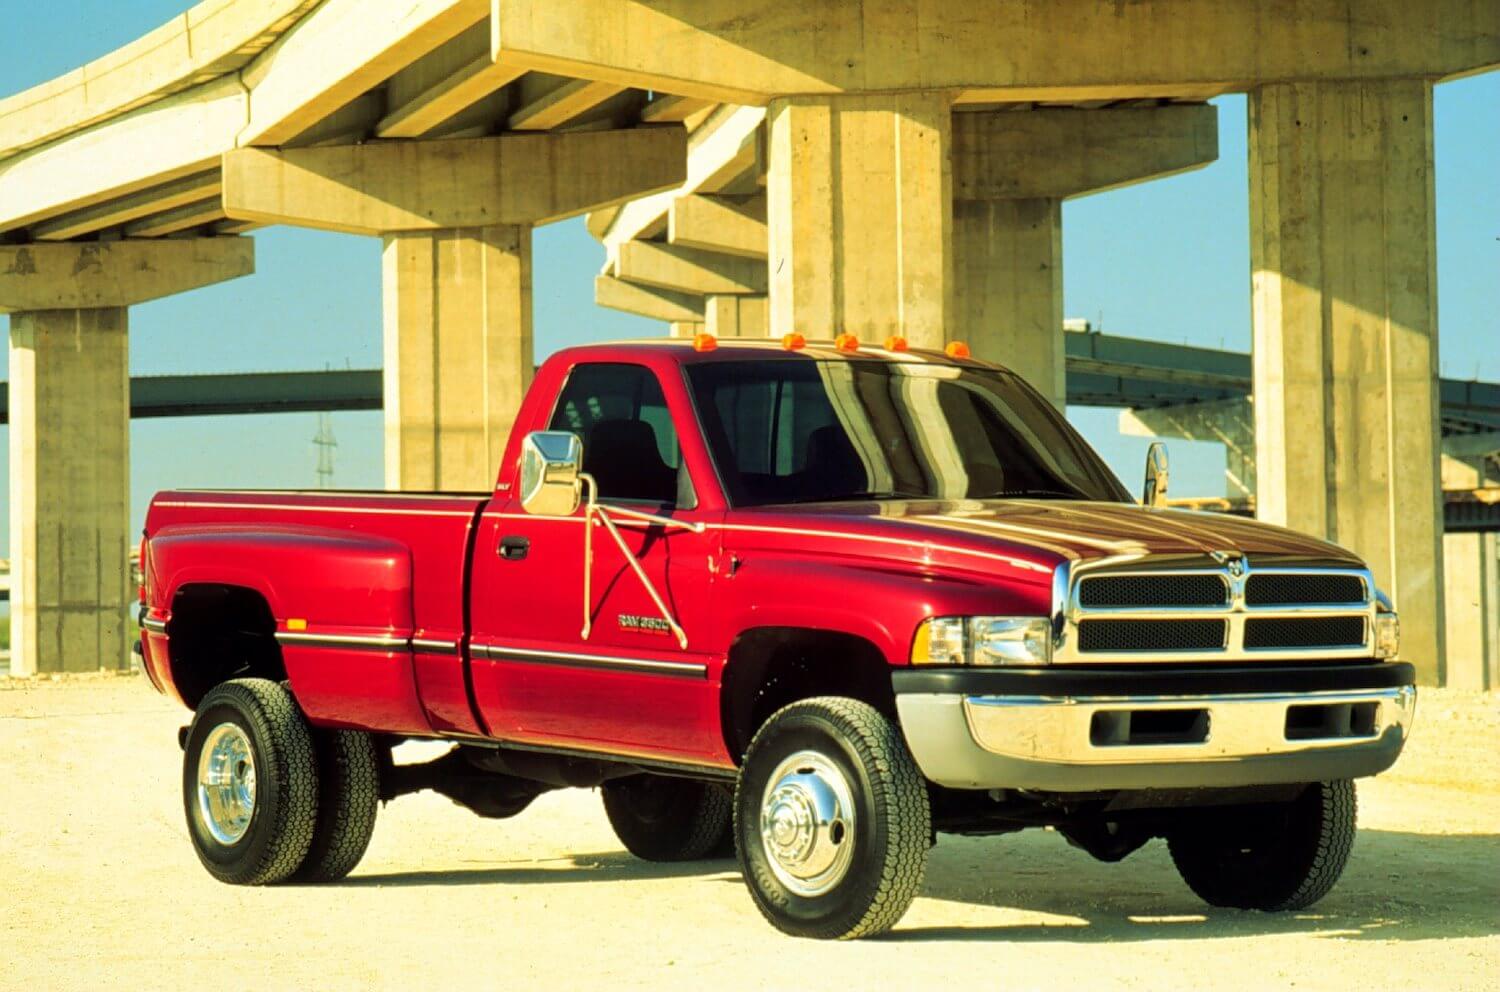 A red 1997 Dodge Ram 3500 truck with the Cummins I6 turbodiesel engine, parked under a bridge.